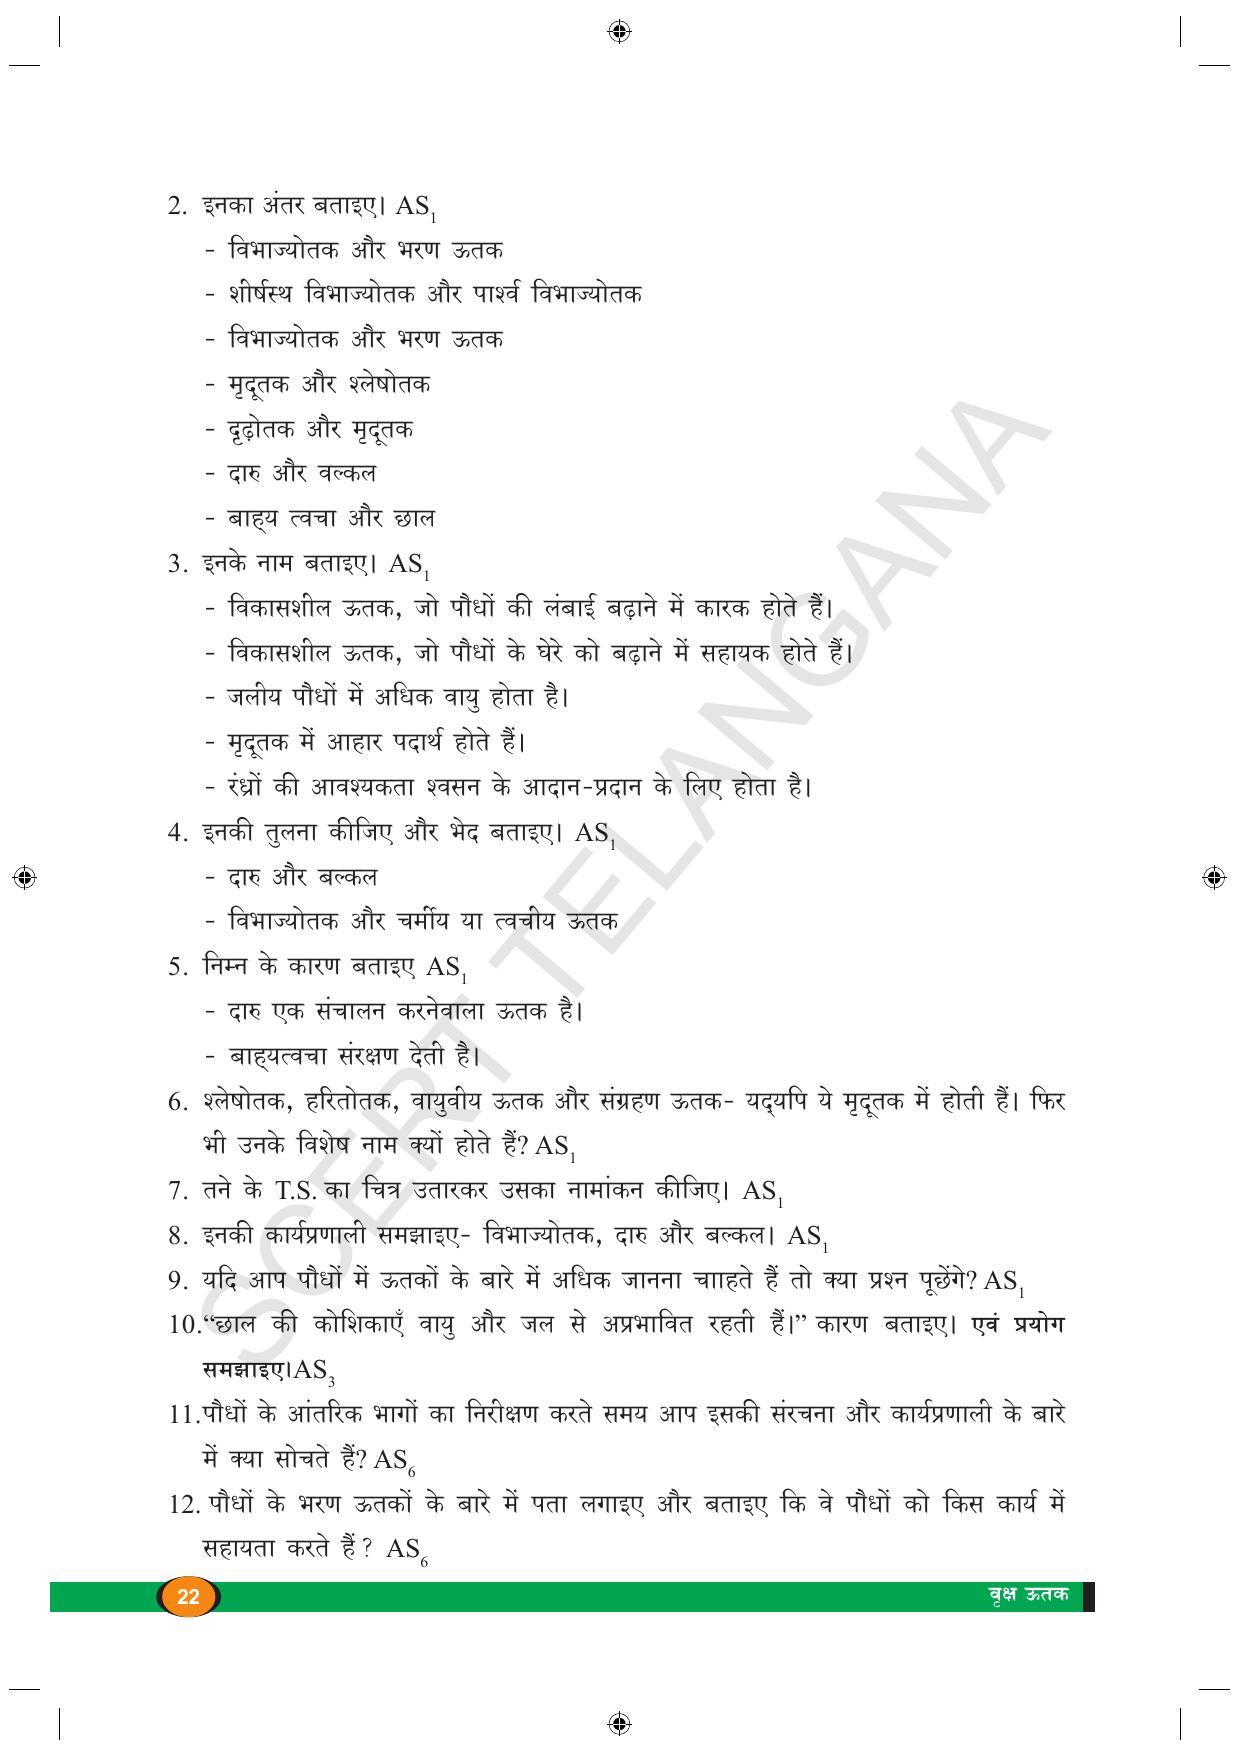 TS SCERT Class 9 Biological Science (Hindi Medium) Text Book - Page 34